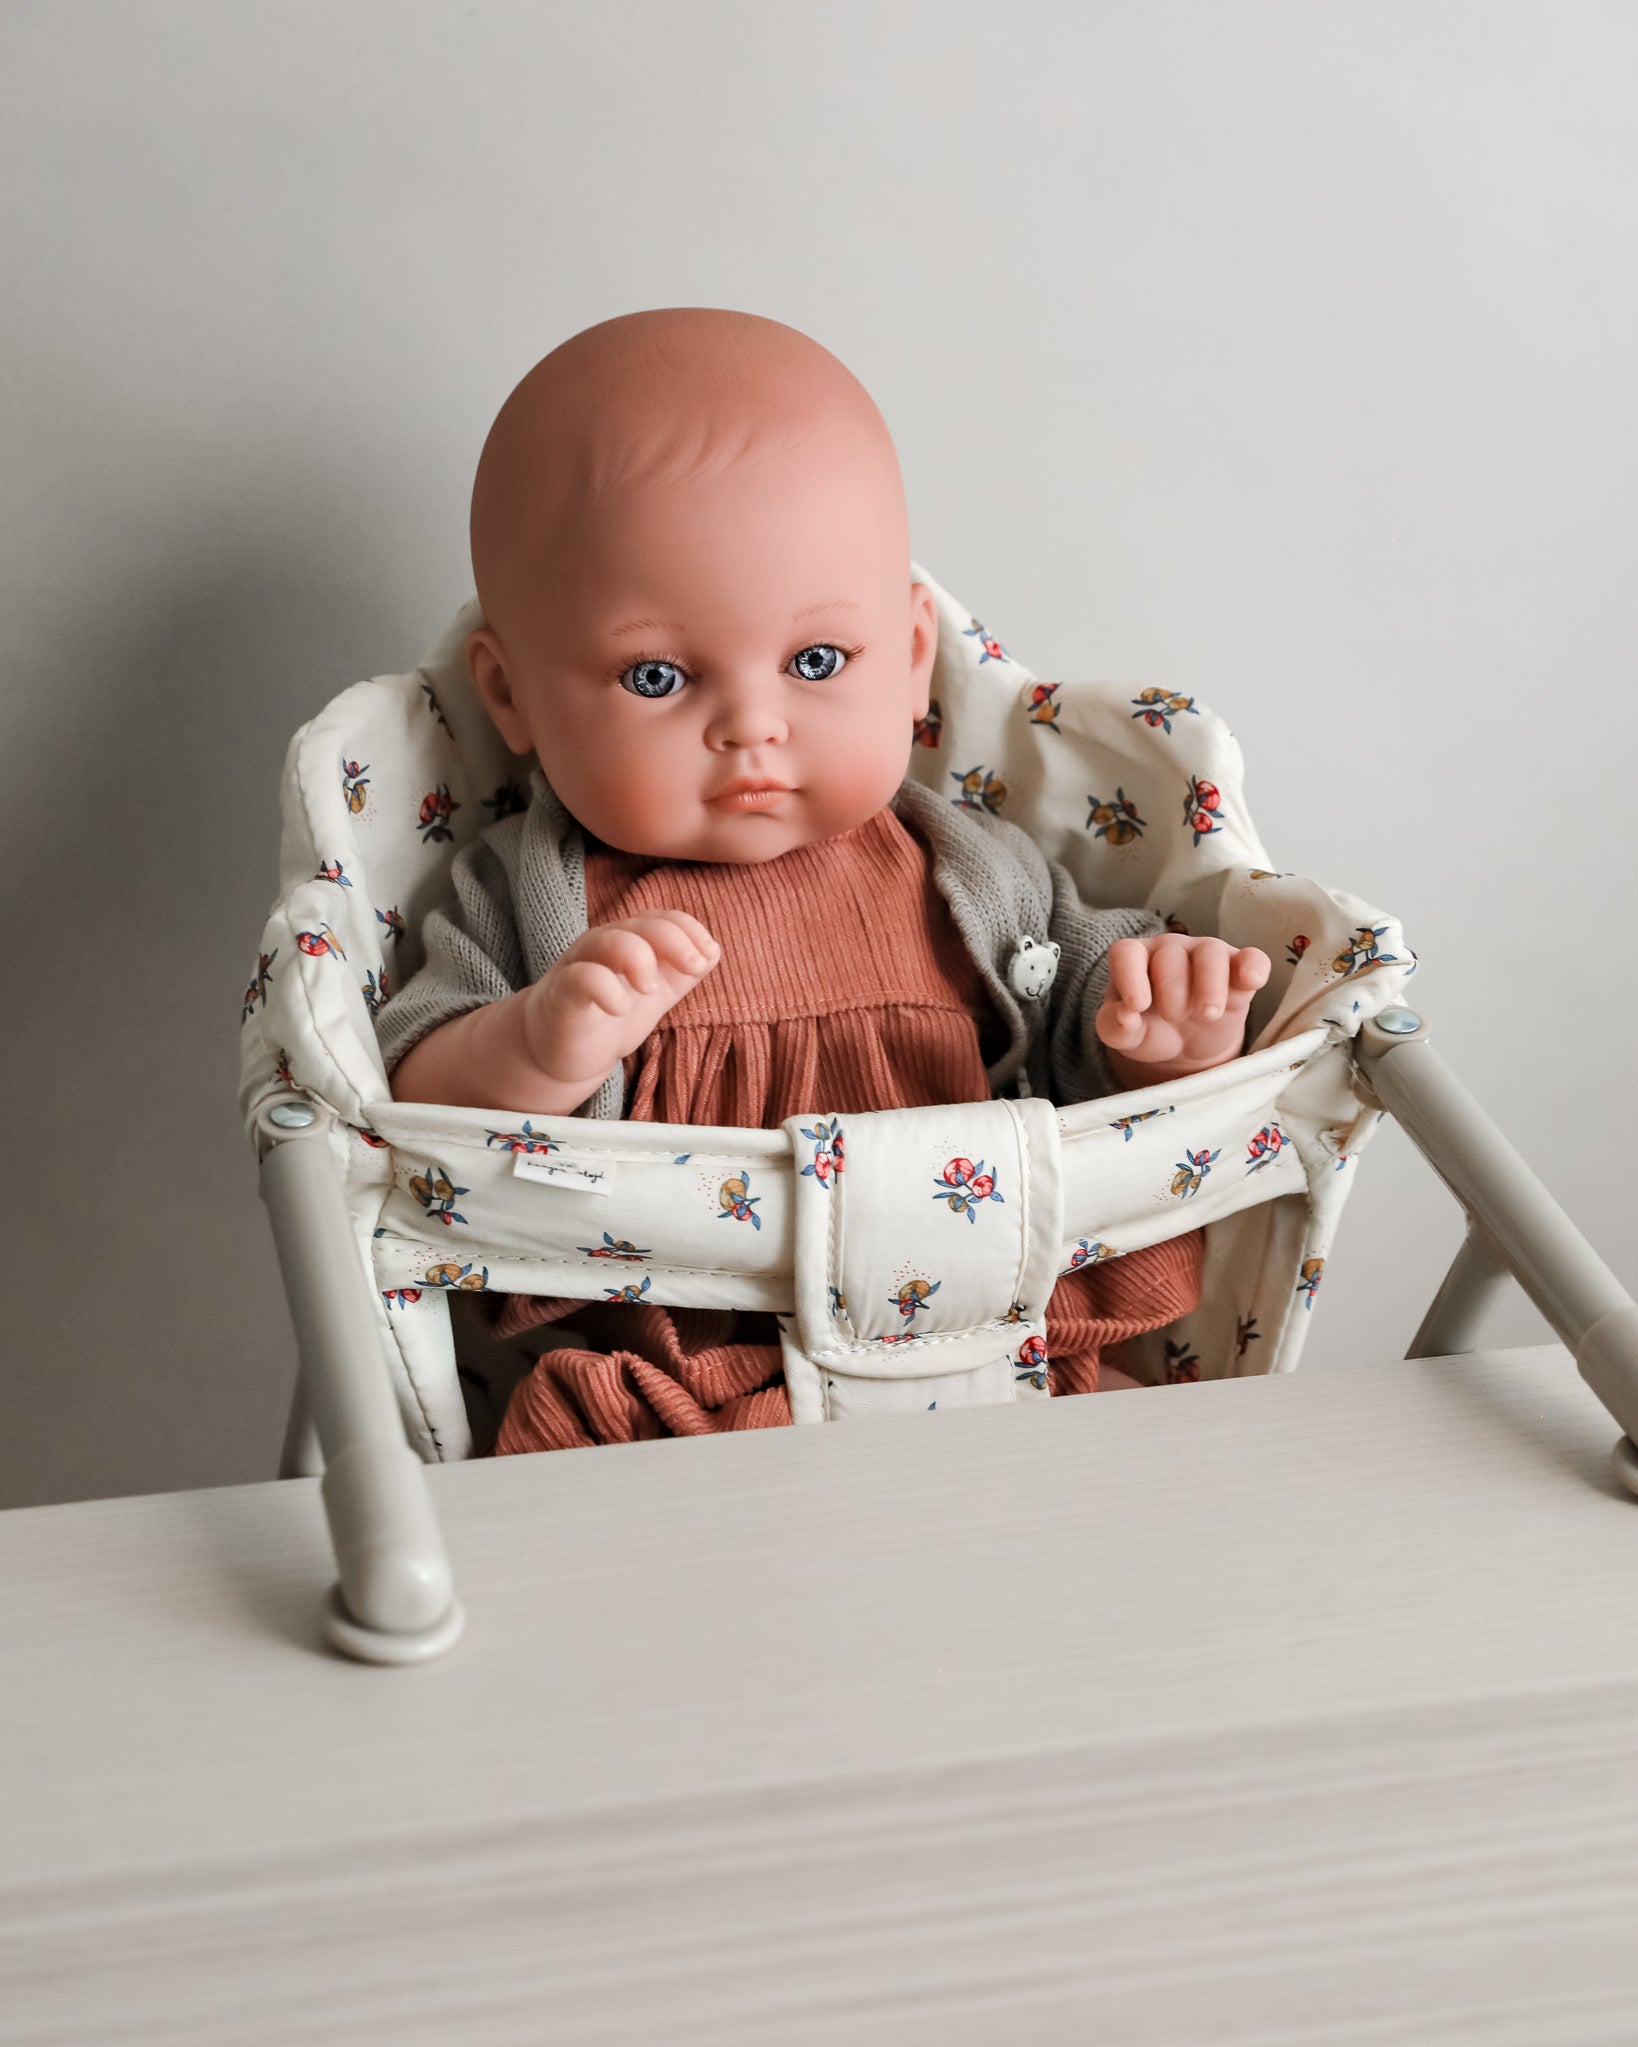 Doll chair, doll table chair, doll accessories, dolls and accessories